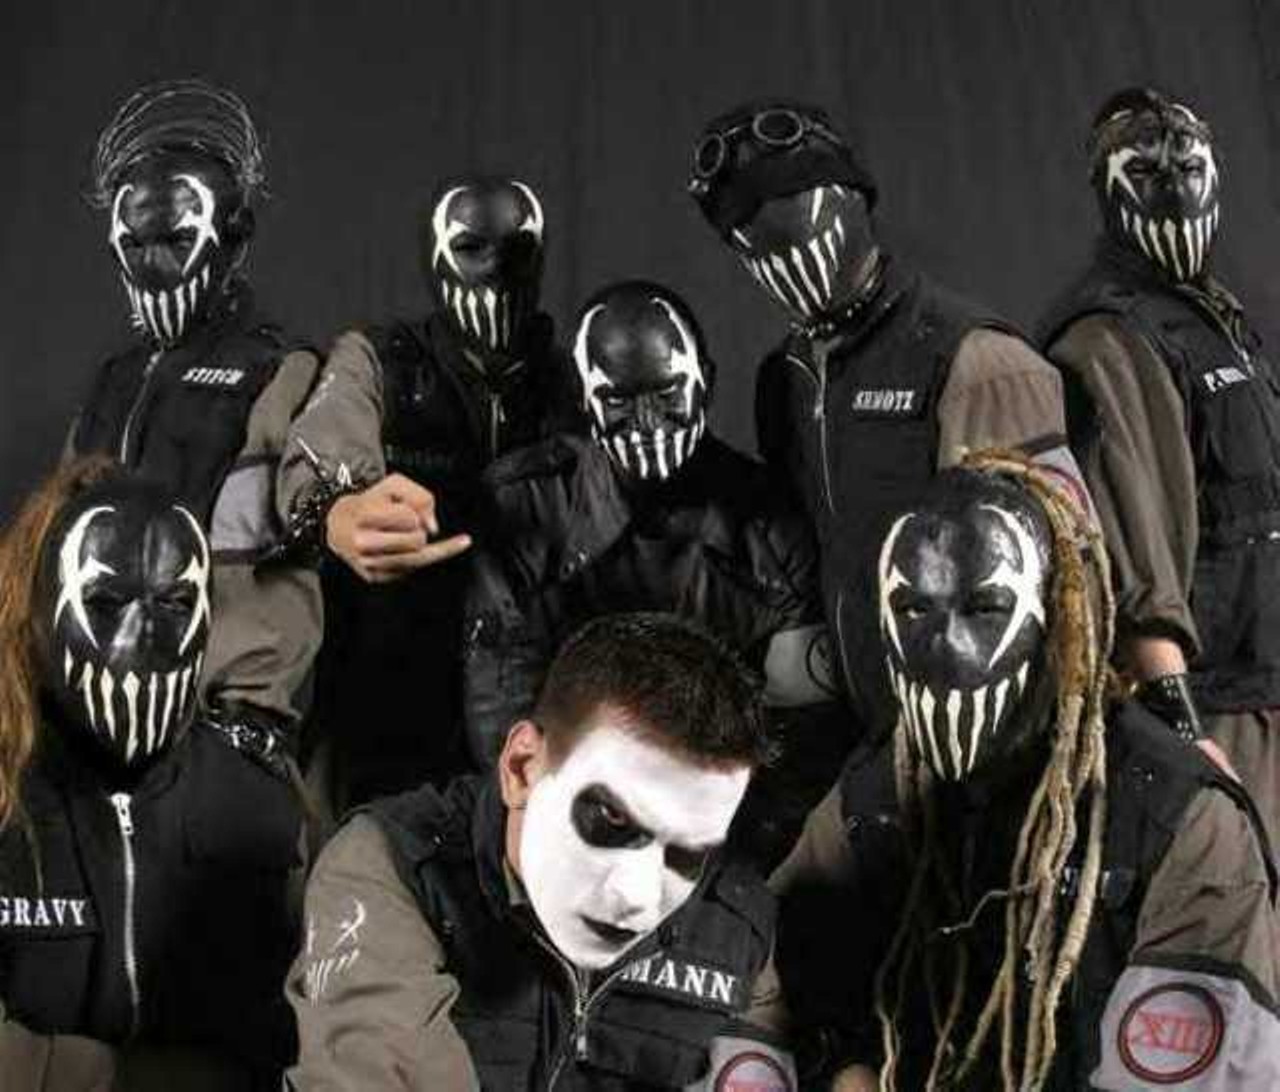 Mushroomhead
12/21 @ the Machine Shop, Flint
Slipknot rip-off, or intense industrial alt-metal machine from Cleveland? You decide.